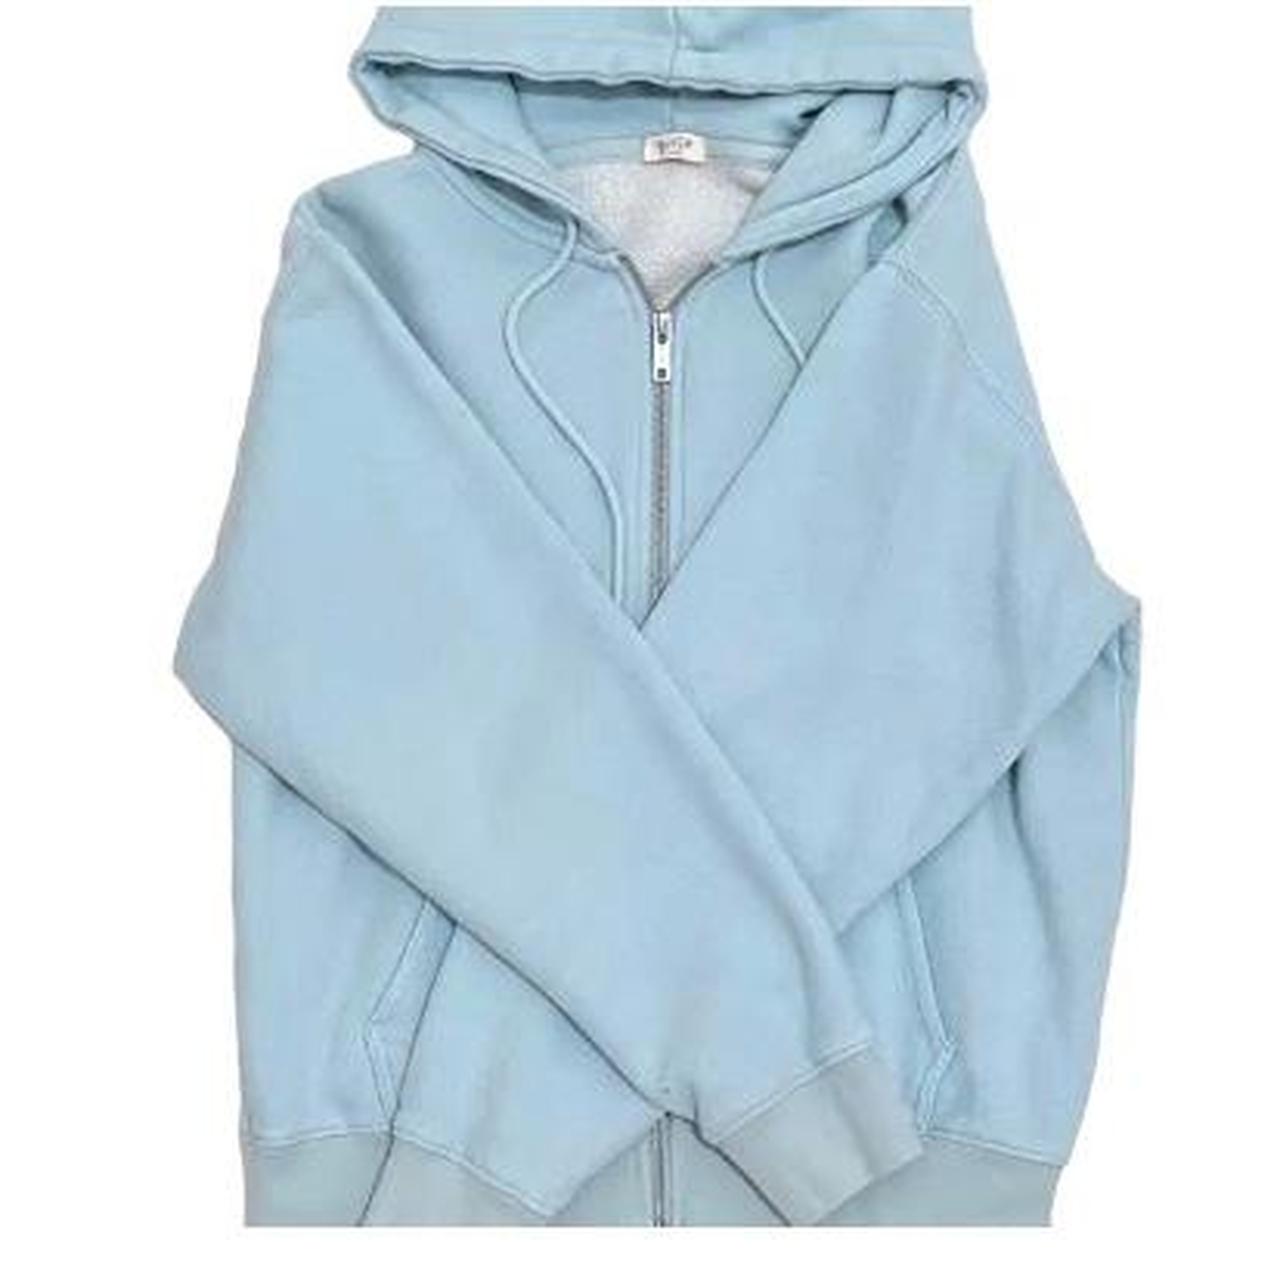 New Brandy Melville Carla Hoodie Navy/Gray oversized fit  Brandy melville carla  hoodie, Carla hoodie, Clothes design